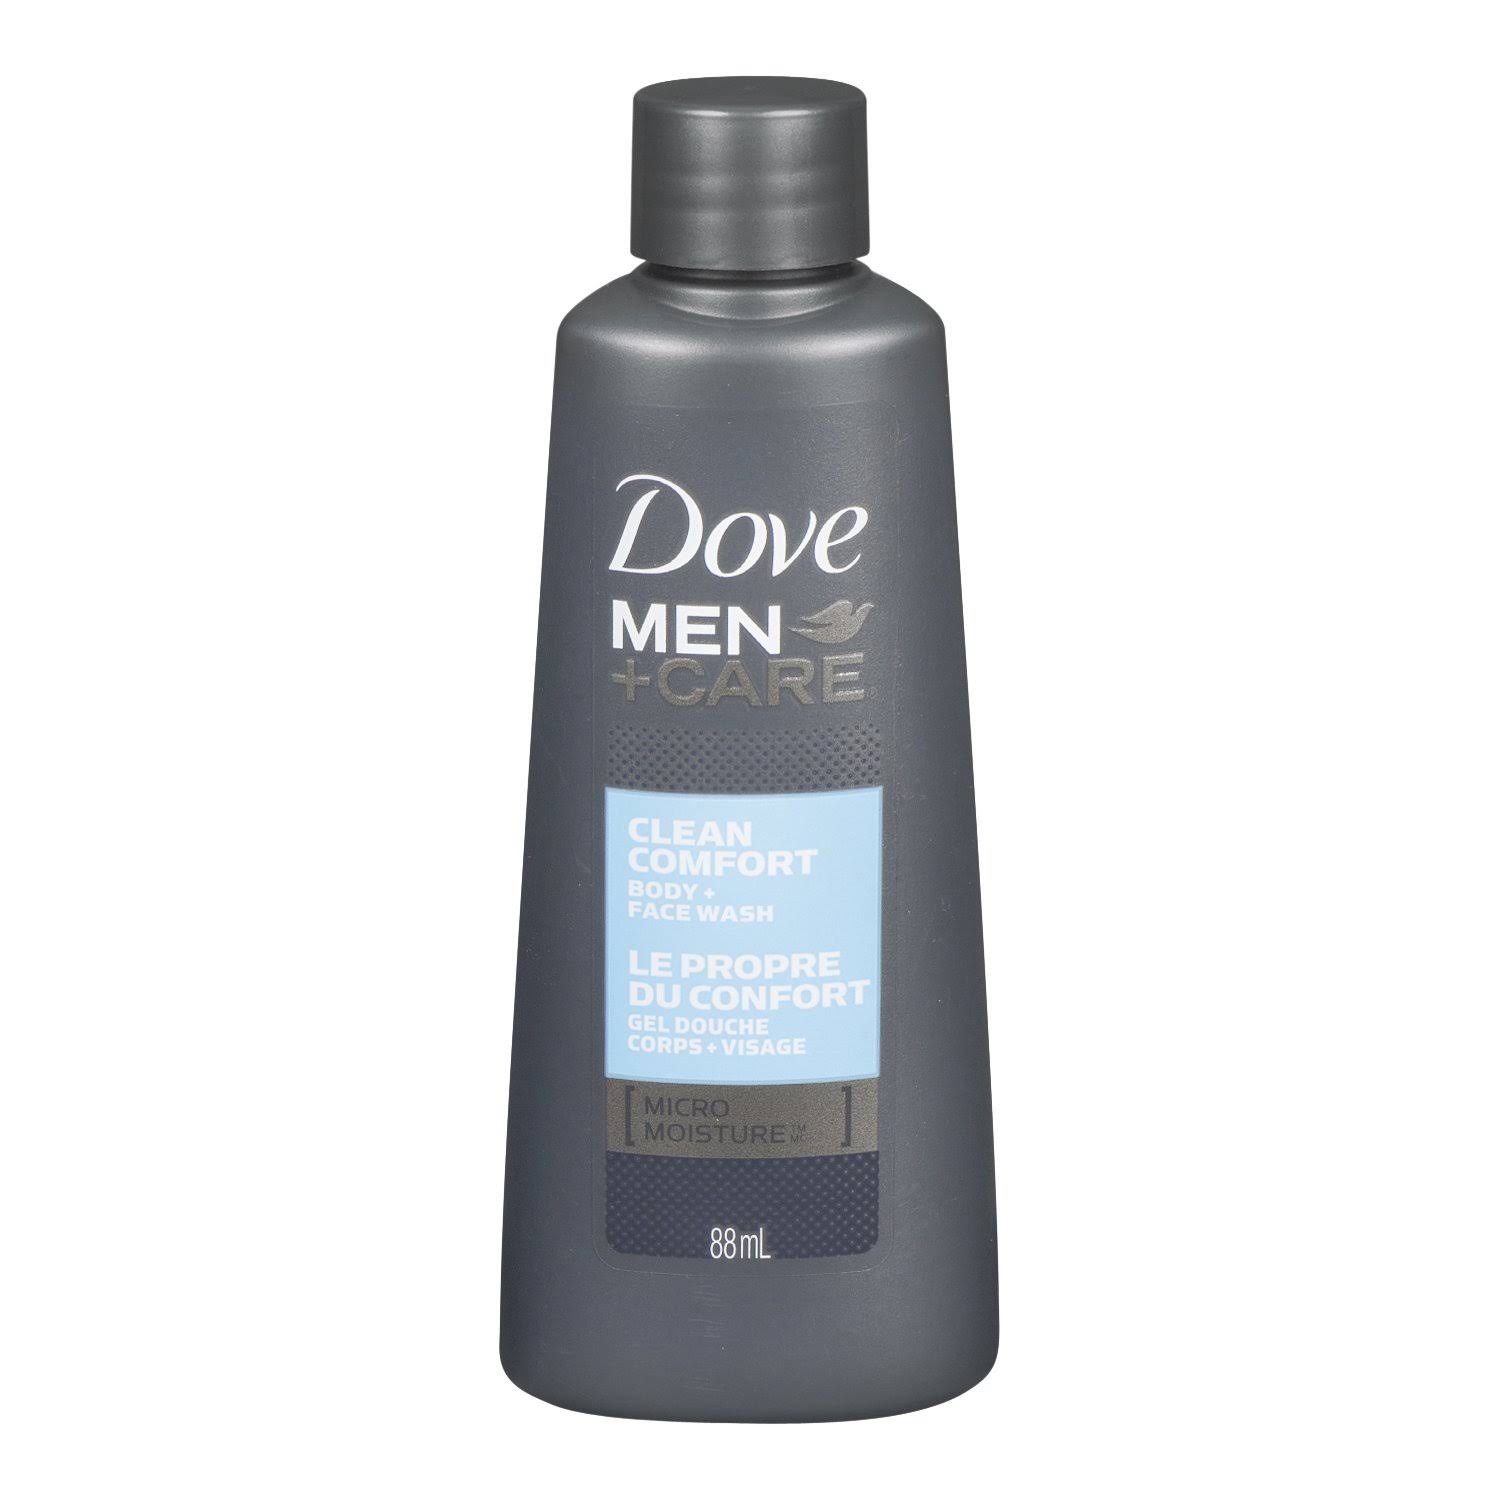 Dove Men Care Clean Comfort Body and Face Wash - 88ml